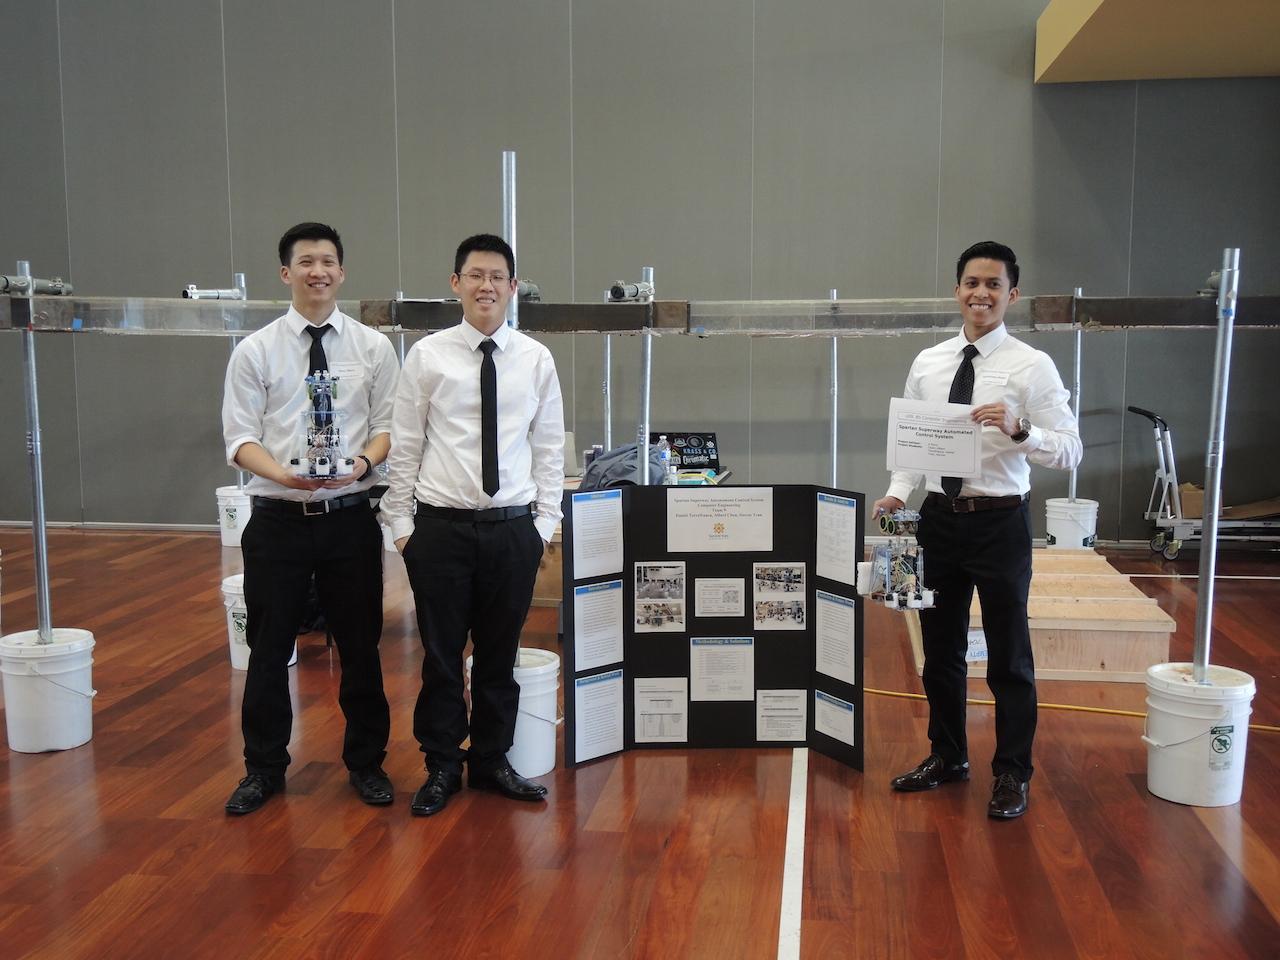 Students showcasing their display for CMPE 2014.